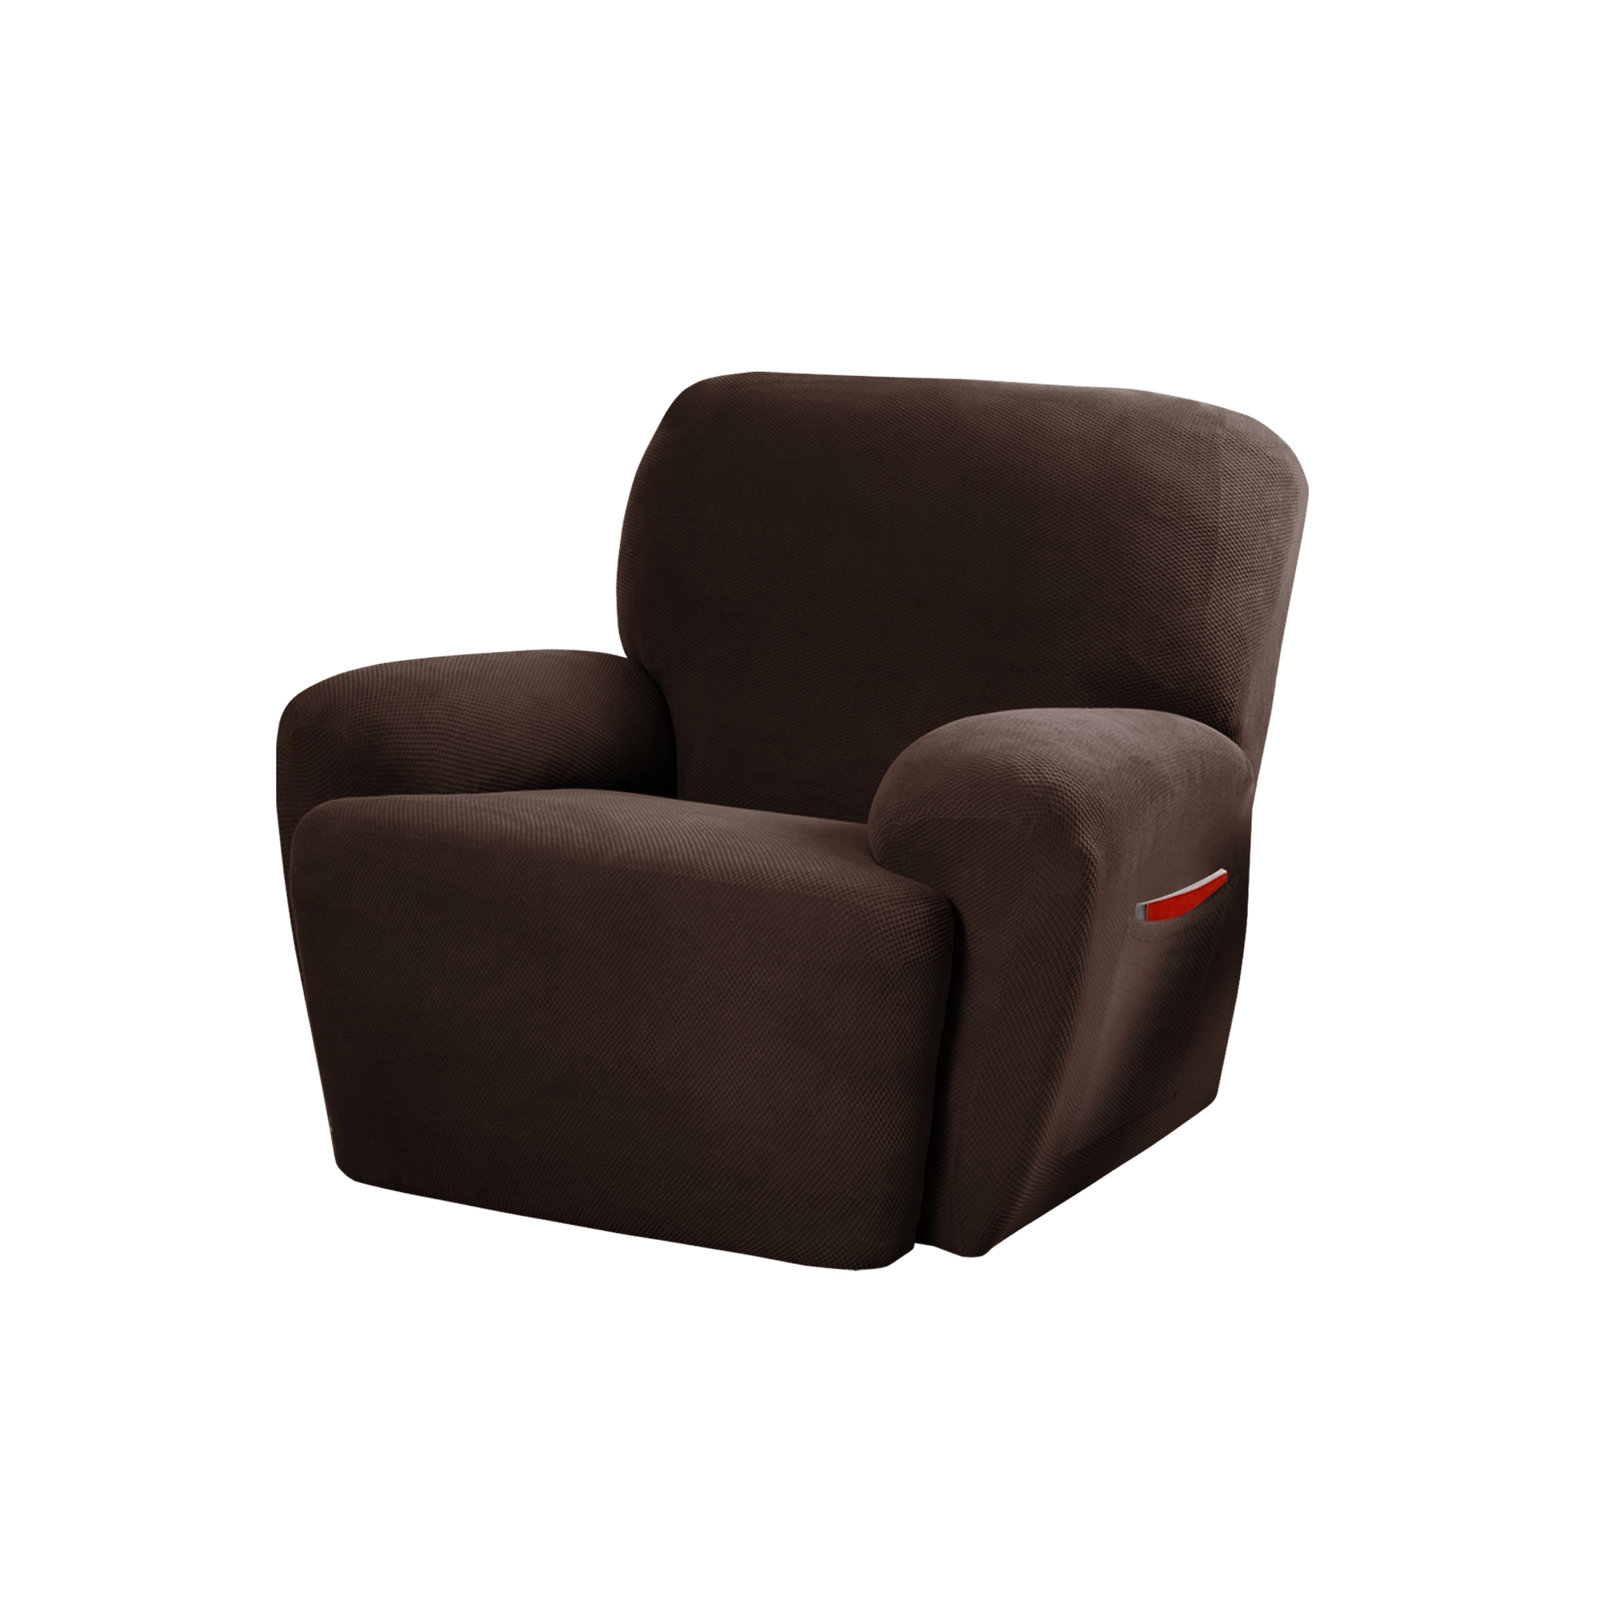 Darby Home Co Ultra-Soft Stretch T-Cushion Recliner Slipcover & Reviews